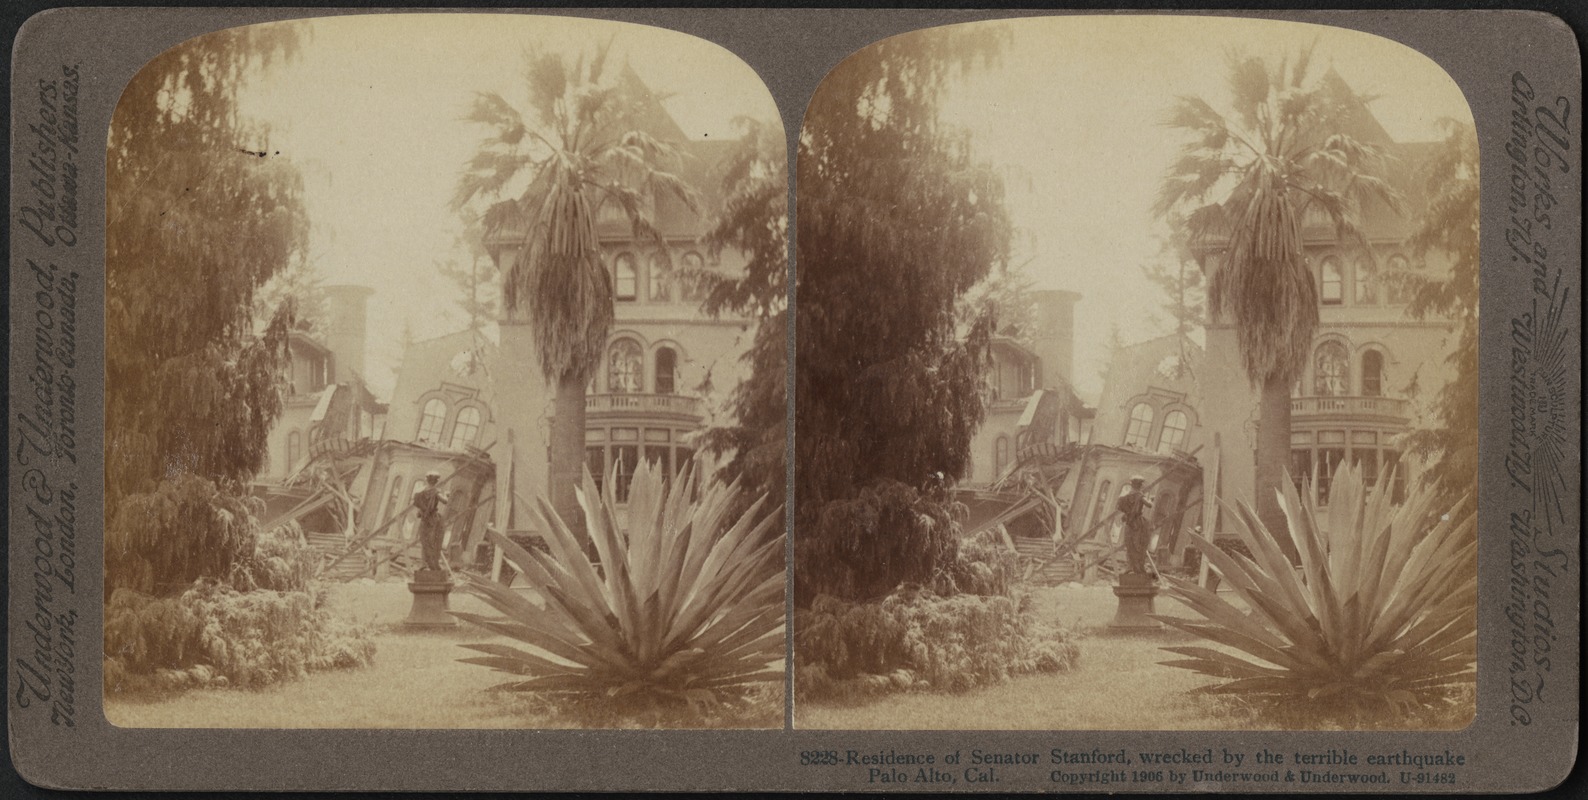 Residence of Senator Stanford, wrecked by the terrible earthquake Palo Alto, Cal.